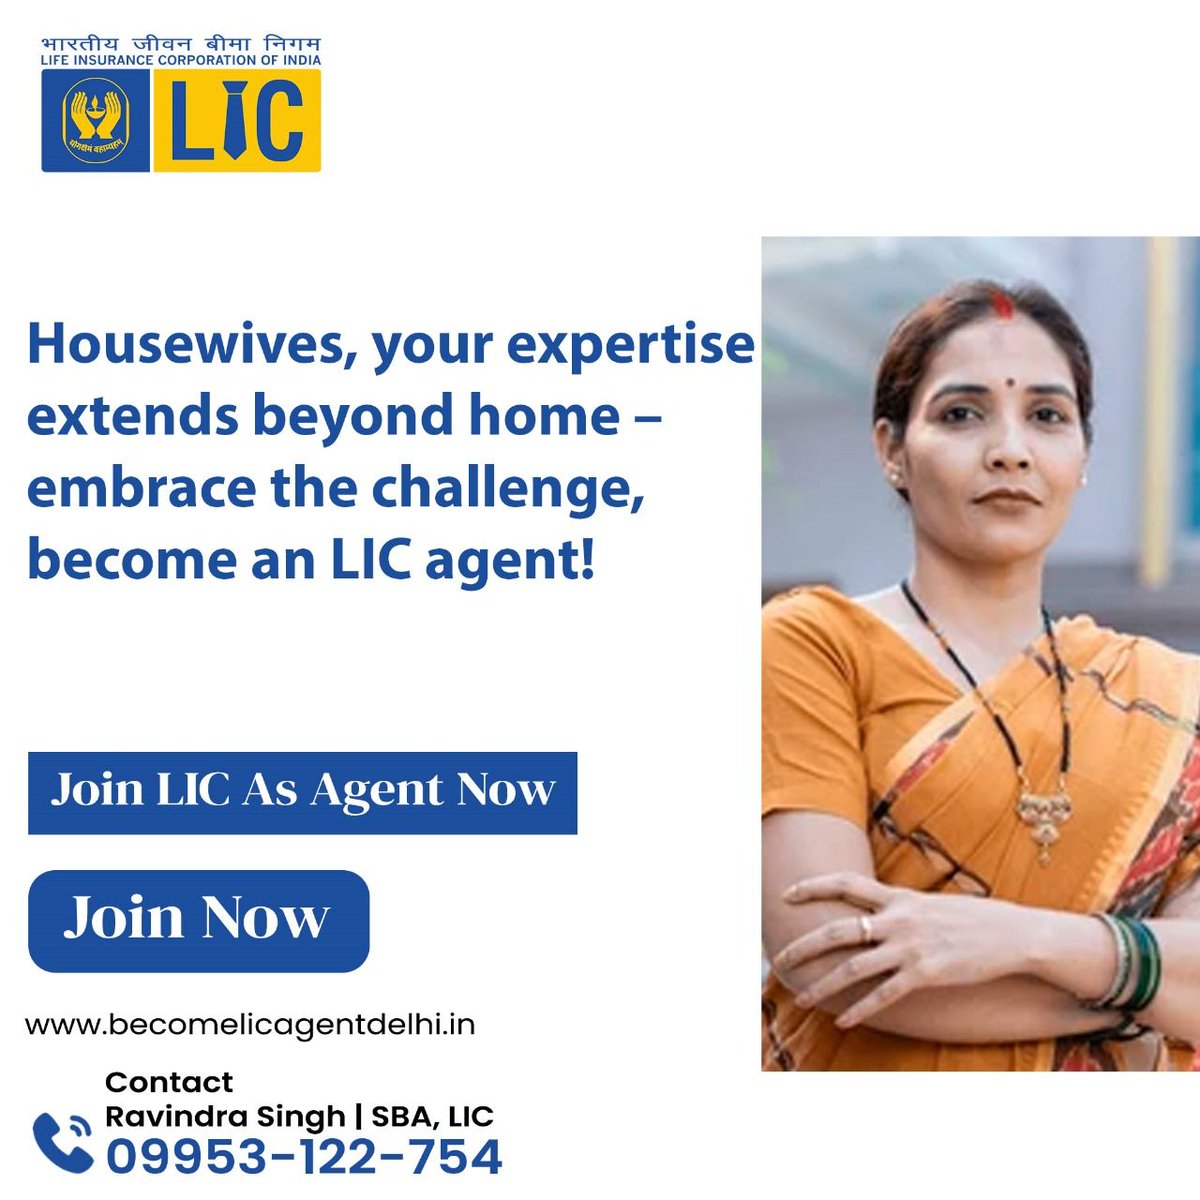 Housewives Your Expertise Extends Beyond the Home Embrace The  Challenge and Become An Lic Agent.
.
.
.
 #PersonalFinanceInsights
#ExpertFinancialGuidance #BudgetingTips
#DebtManagementSolutions #TaxPlanningStrategies
#InsuranceAdvice #EstatePlanningBenefits